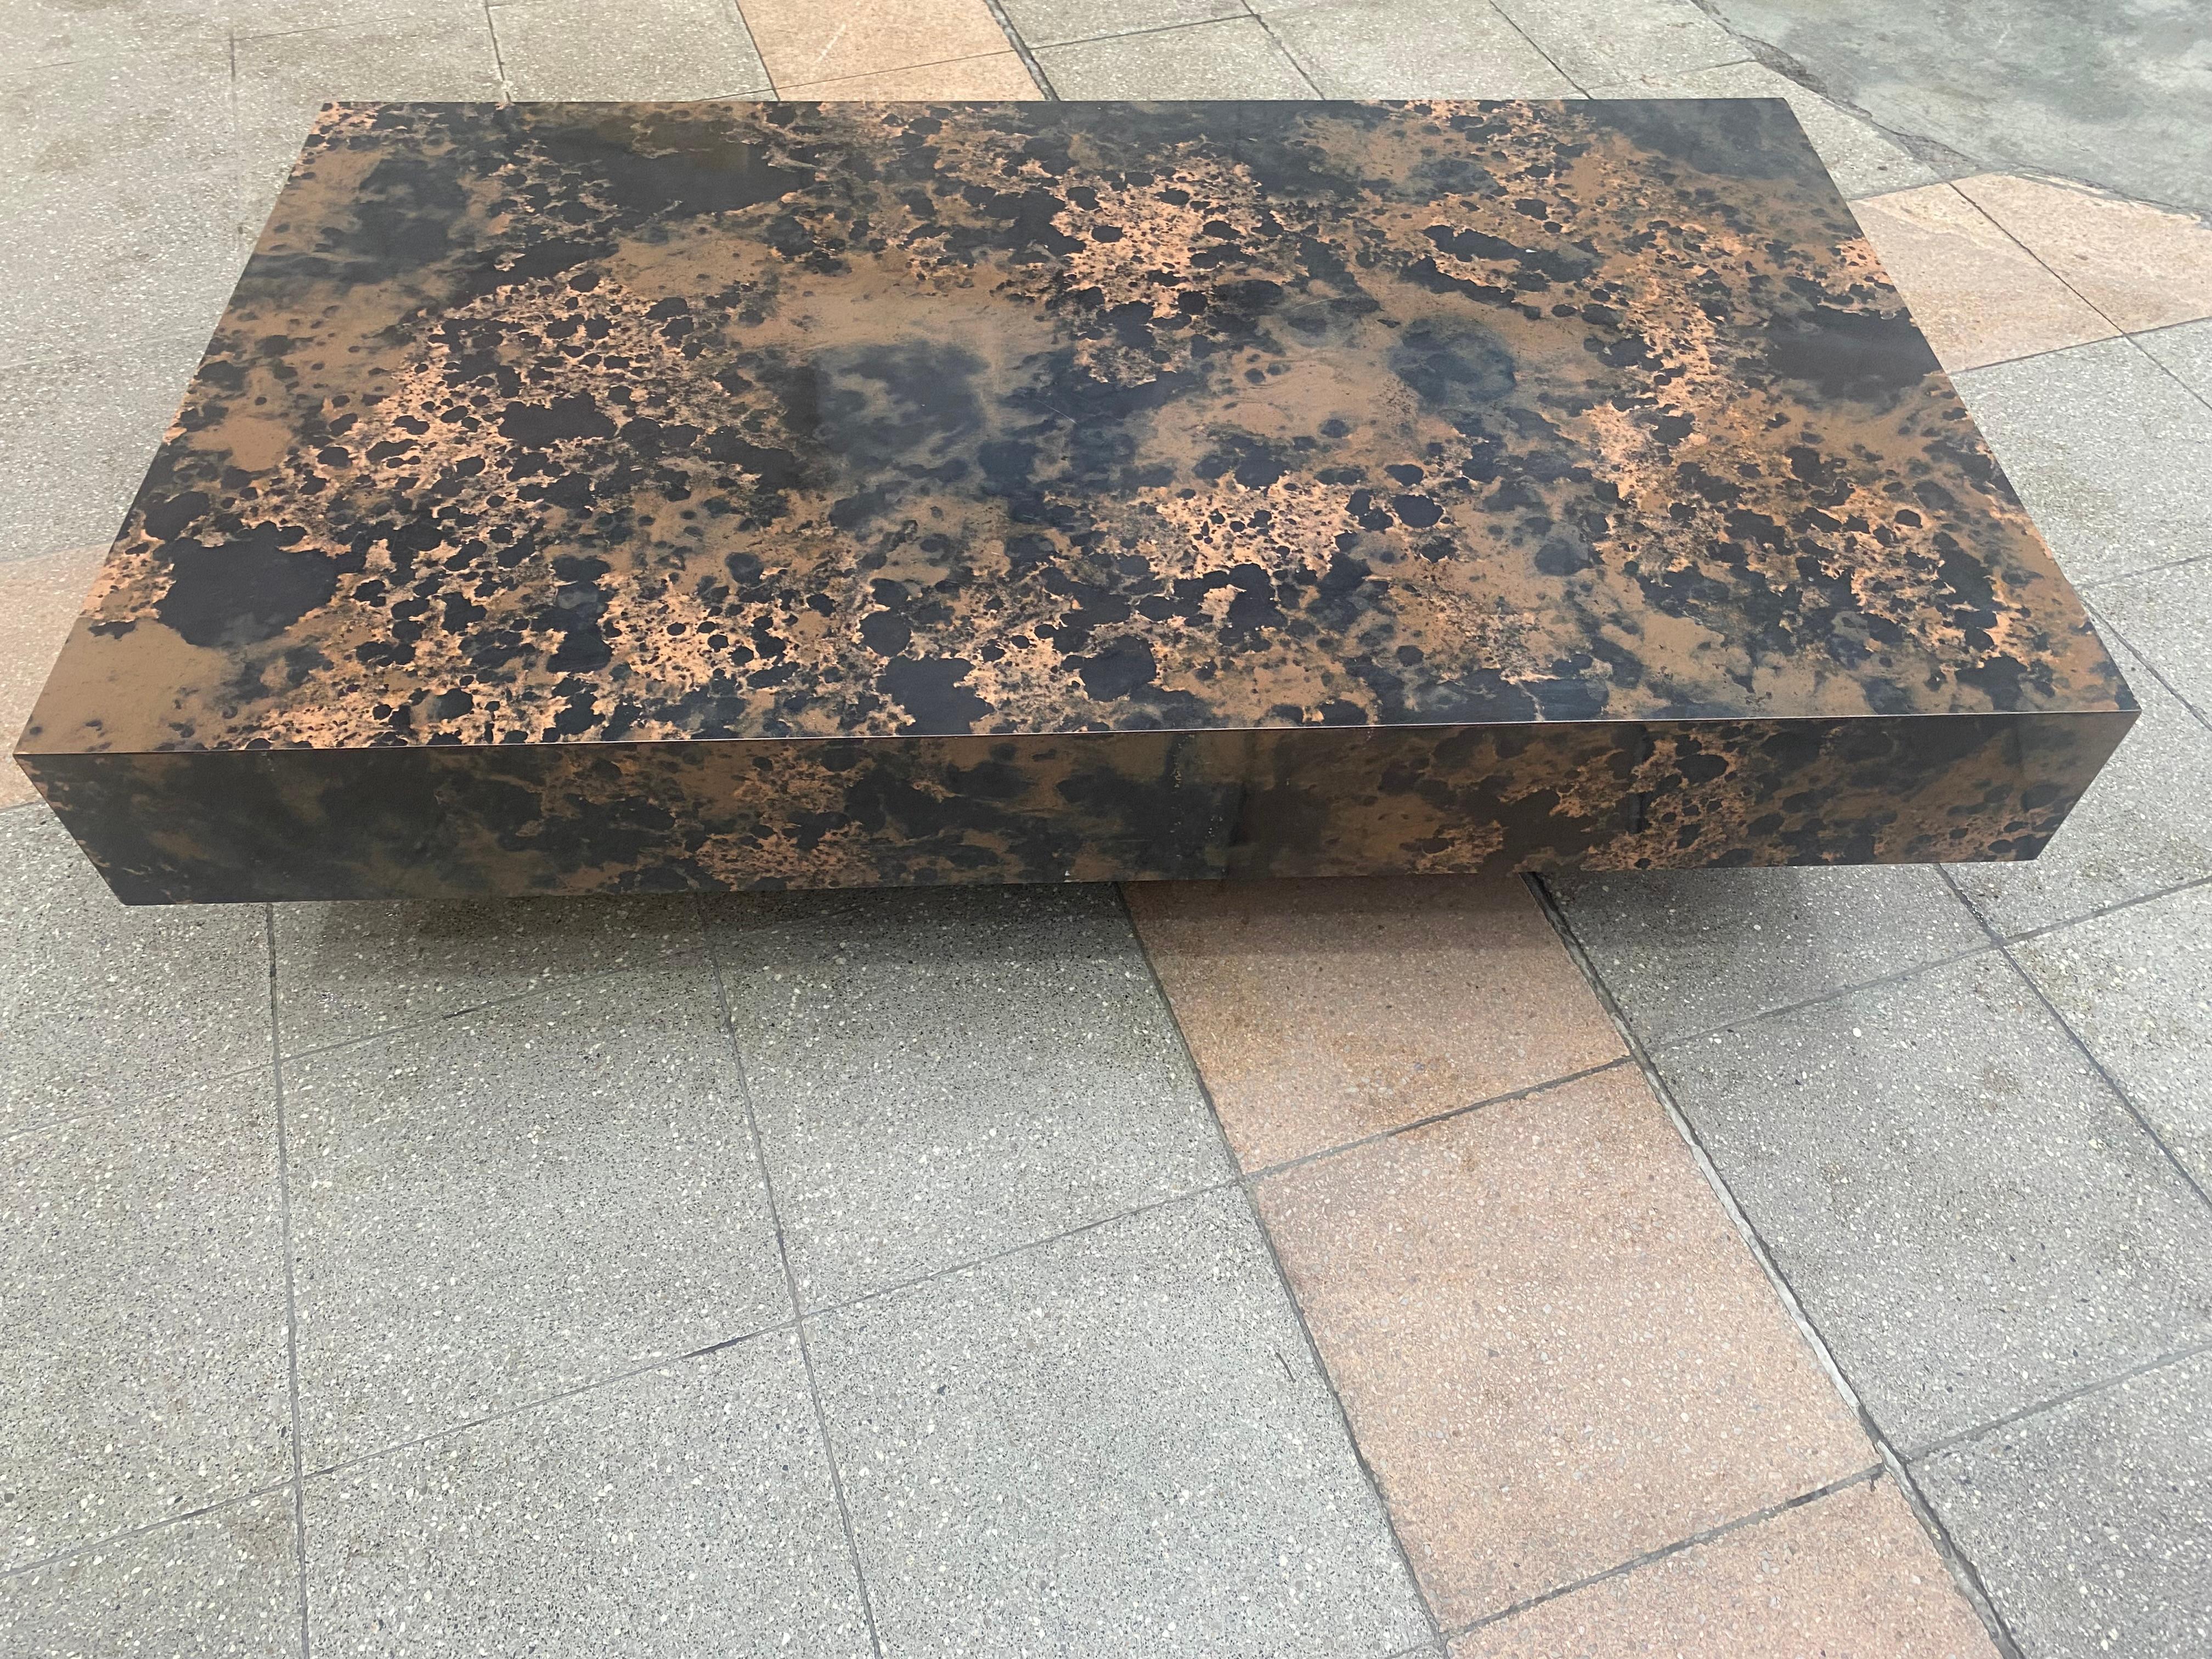 Guy lefevre For Roche Bobois  Solar flare coffee table  Wood/ lacquered melamine In Good Condition For Sale In Saint ouen, FR